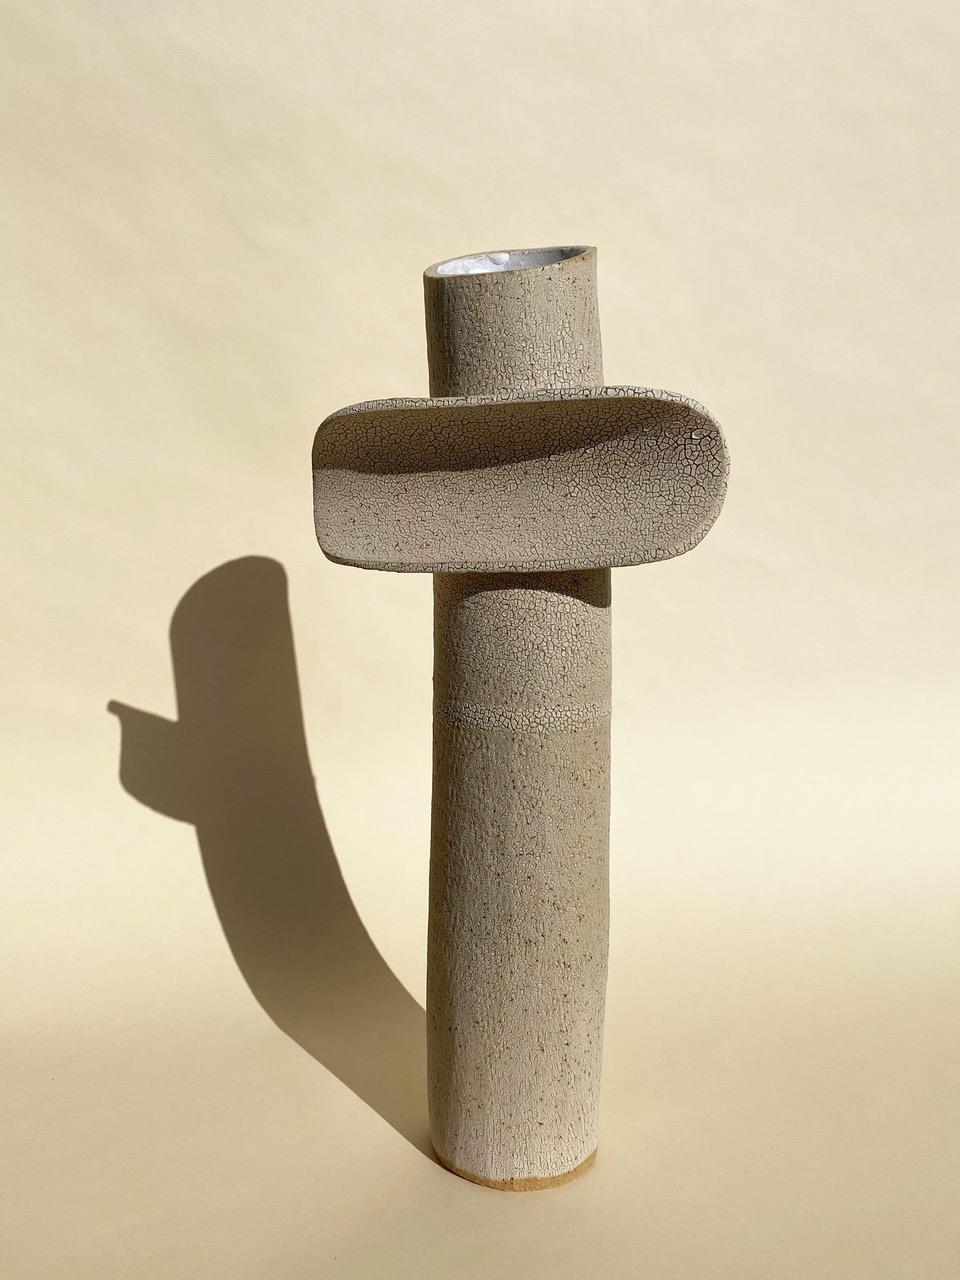 Large crackled TOTEM by Olivia Cognet
Materials: Clay
Dimensions: H around 55-60 cm

Available in different sizes, sets available

TOTEM
Vases, lamps and sculptures with graphic forms, made from clay that gives them a rough look..

Each of